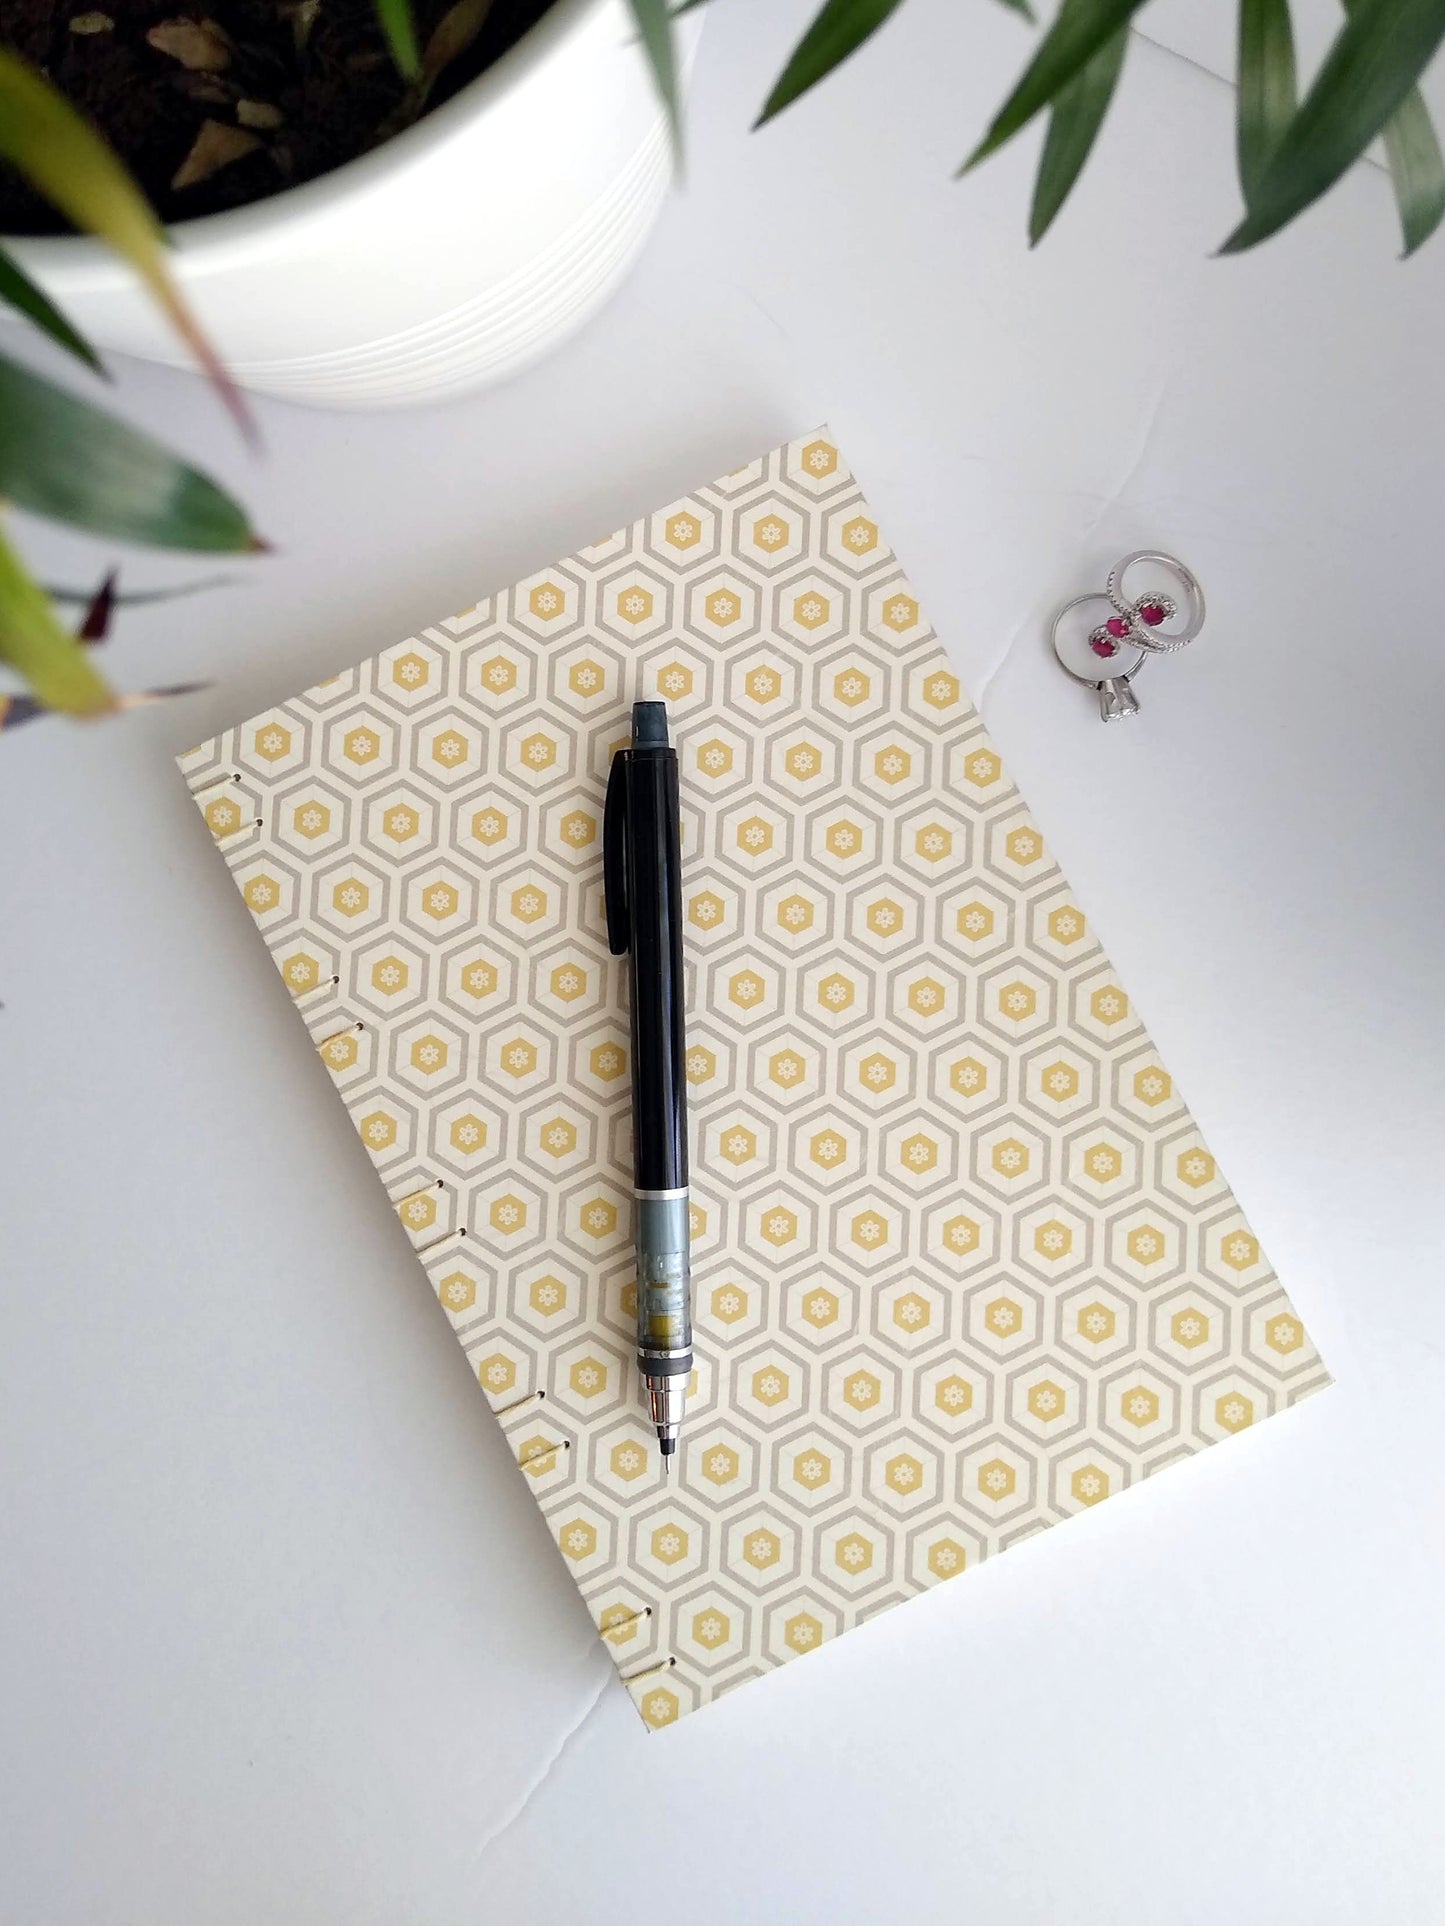 A handmade journal laying on a white background beside a potted plant and a set of rings with a black mechanical pencil resting on top. The cover of the journal is cream with concentric hexagons all over it in grey and yellow. 